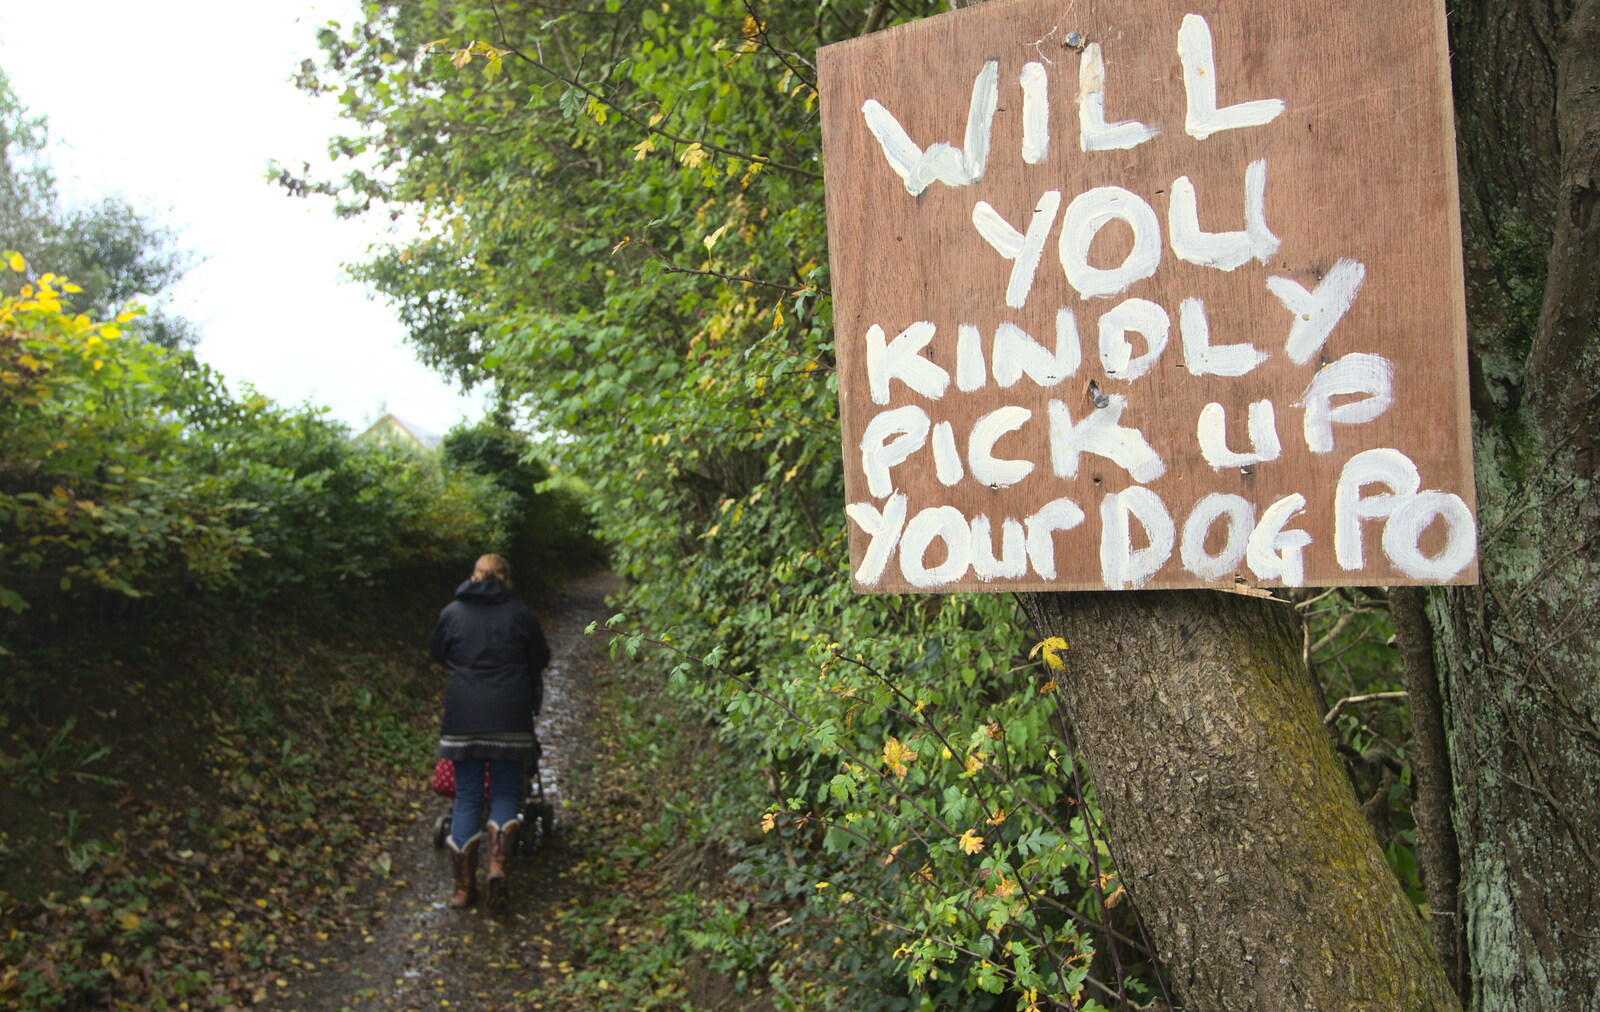 In Spreyton, there's a war raging over 'dog po' from A Few Days in Spreyton, Devon - 26th October 2013